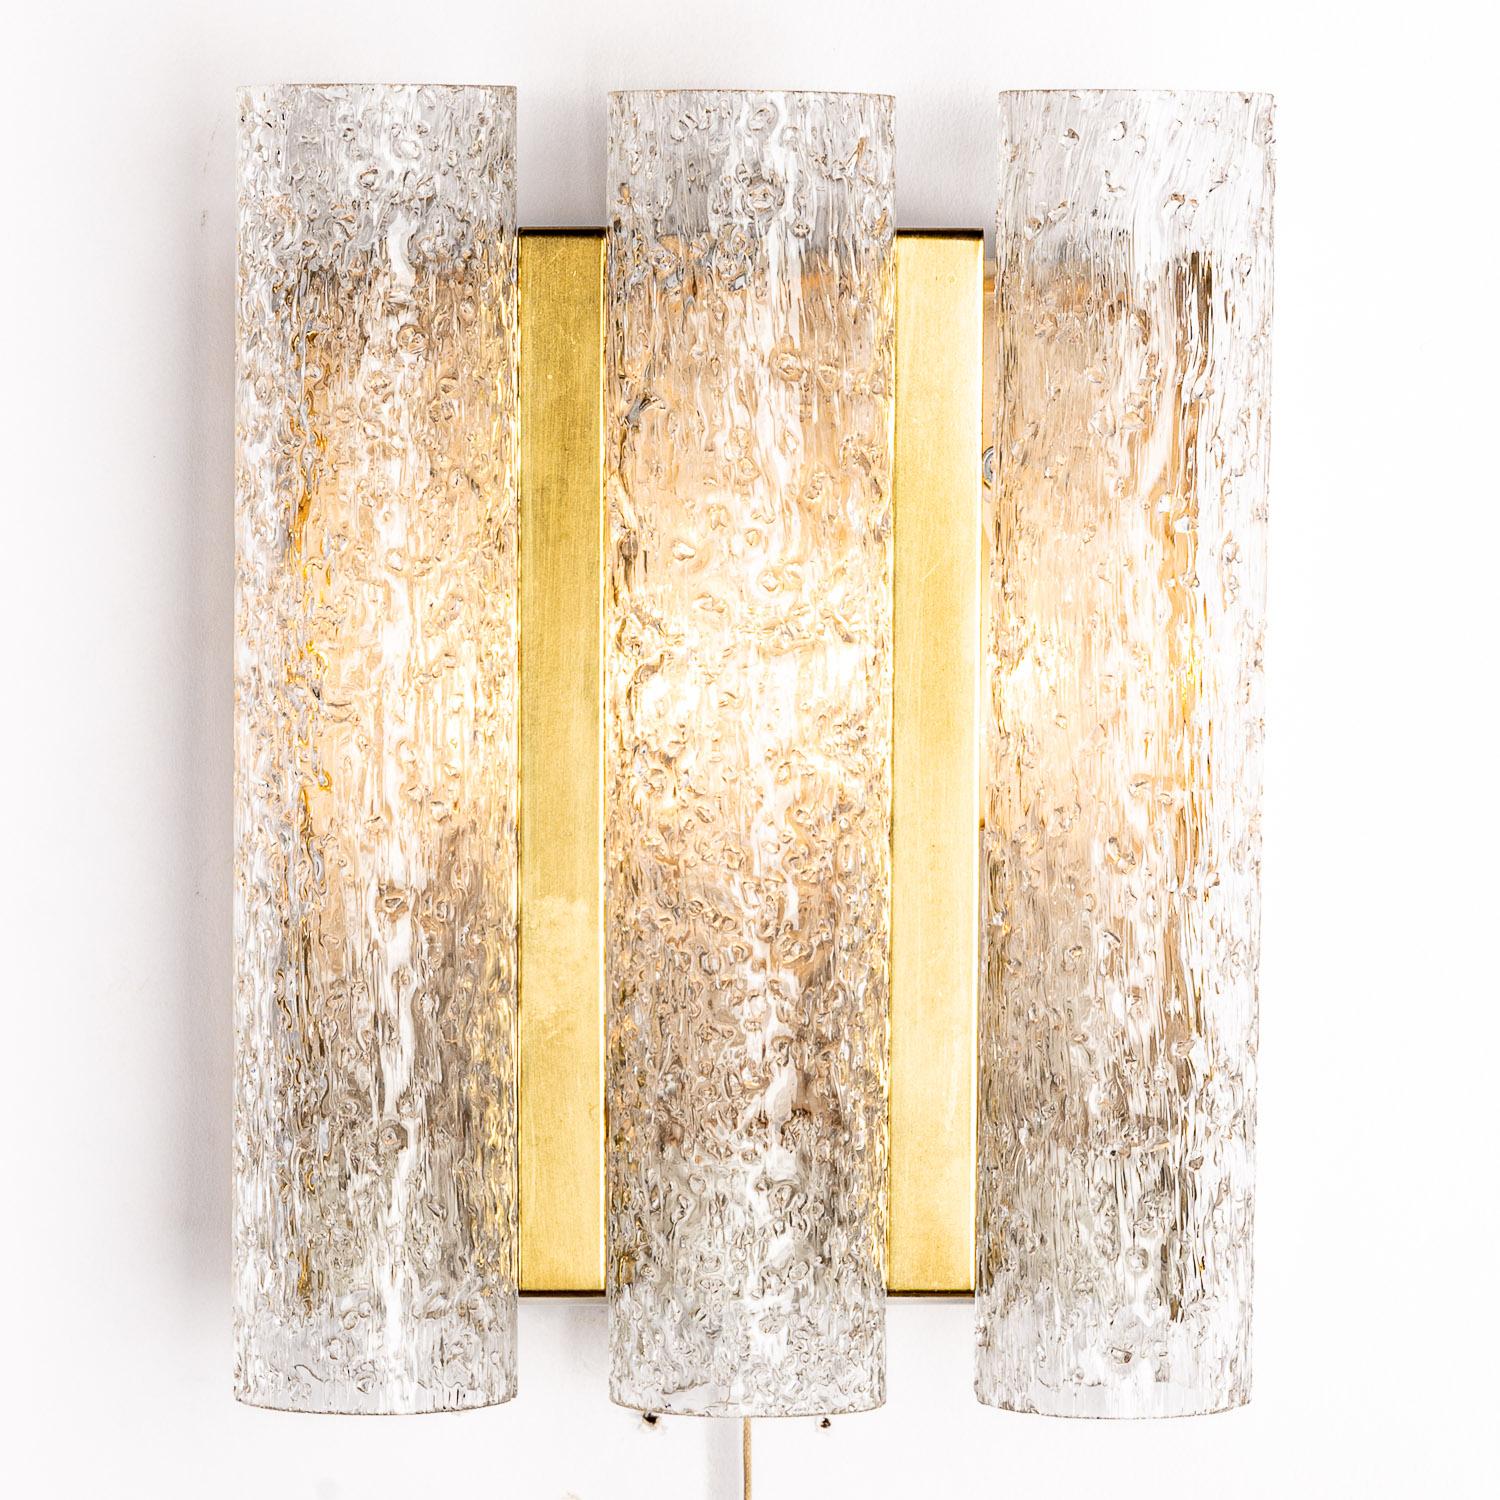 German 1960's Brass, Metal and Glass Tubes Sconces by Doria For Sale